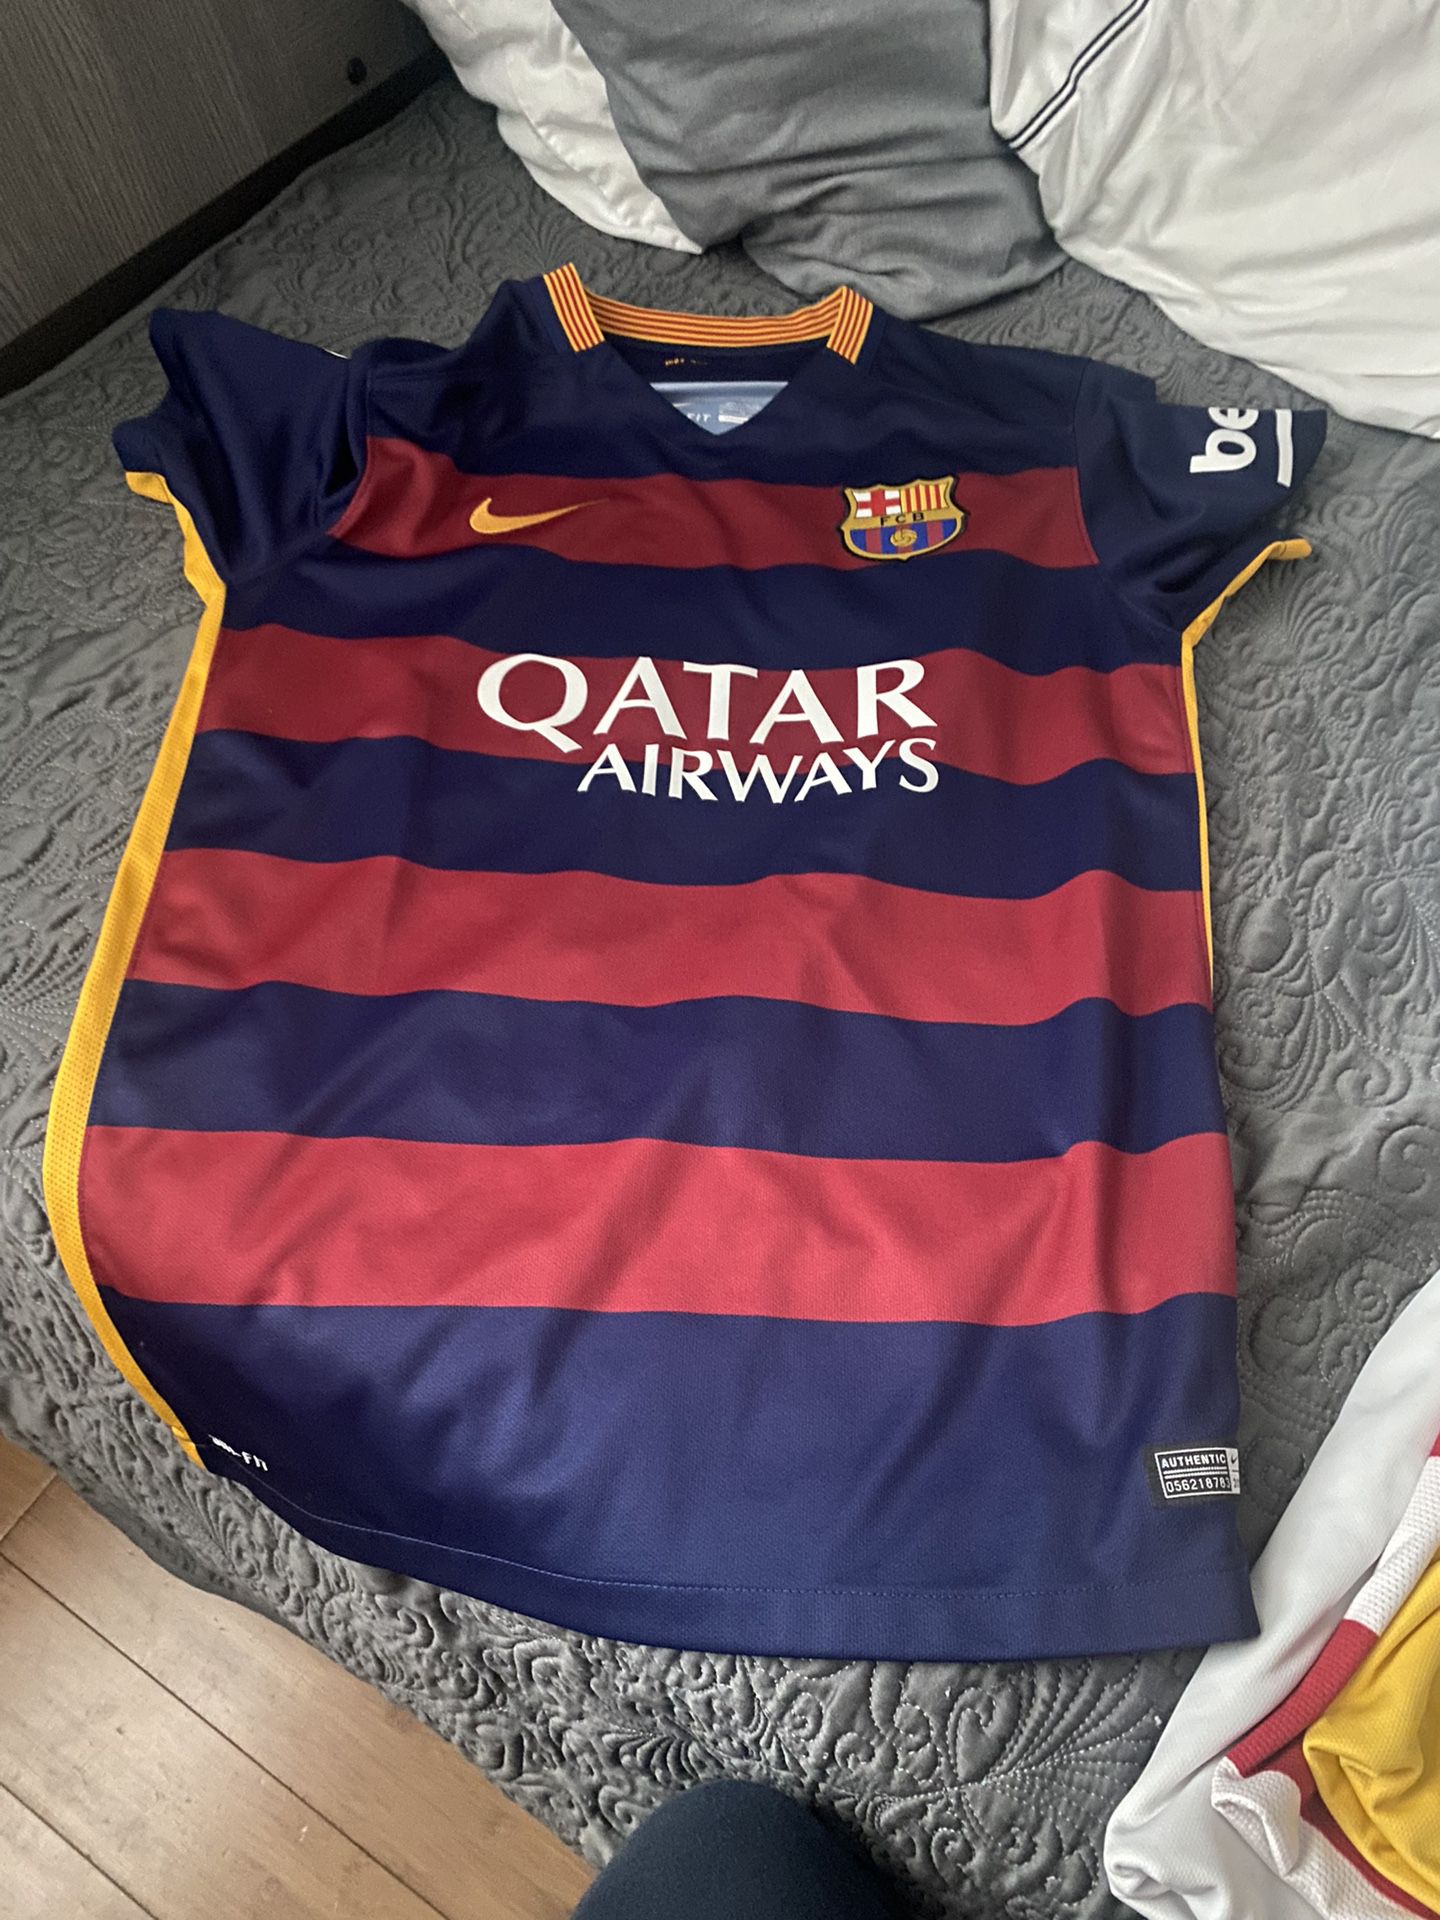 Authentic Soccer Jerseys